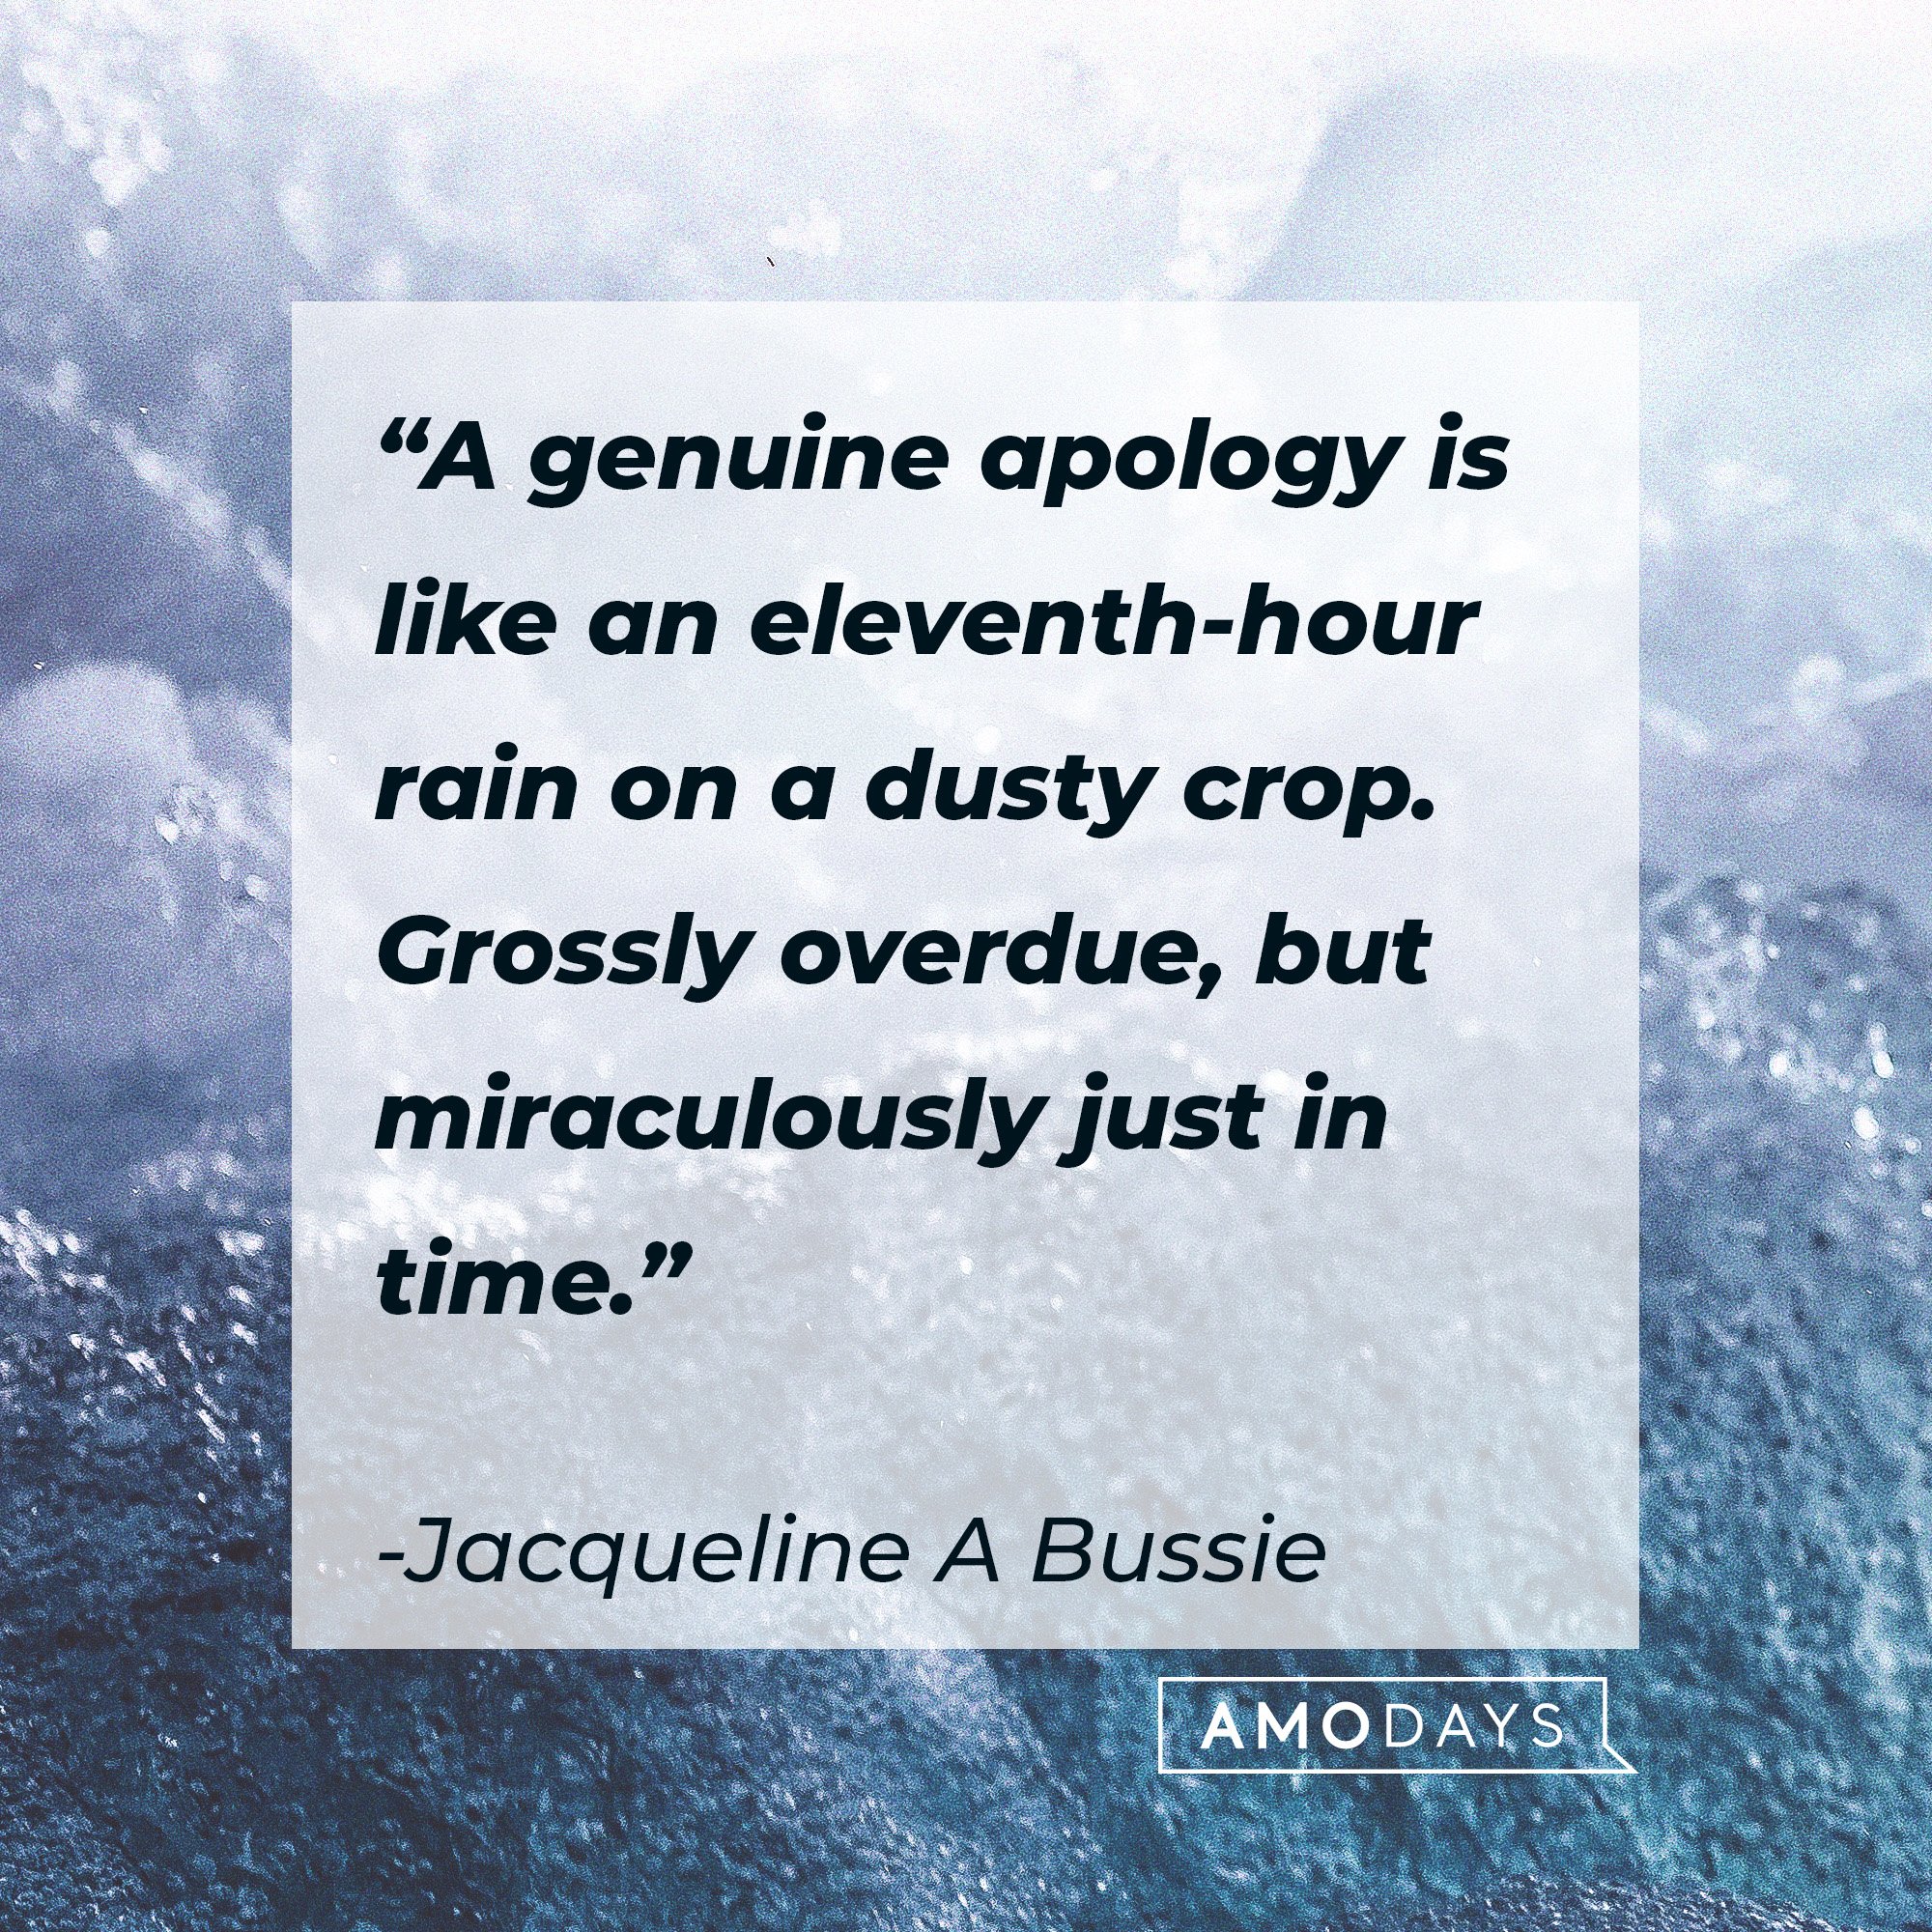 Jacqueline A Bussie's quote: “A genuine apology is like an eleventh-hour rain on a dusty crop. Grossly overdue, but miraculously just in time.” | Image: AmoDays